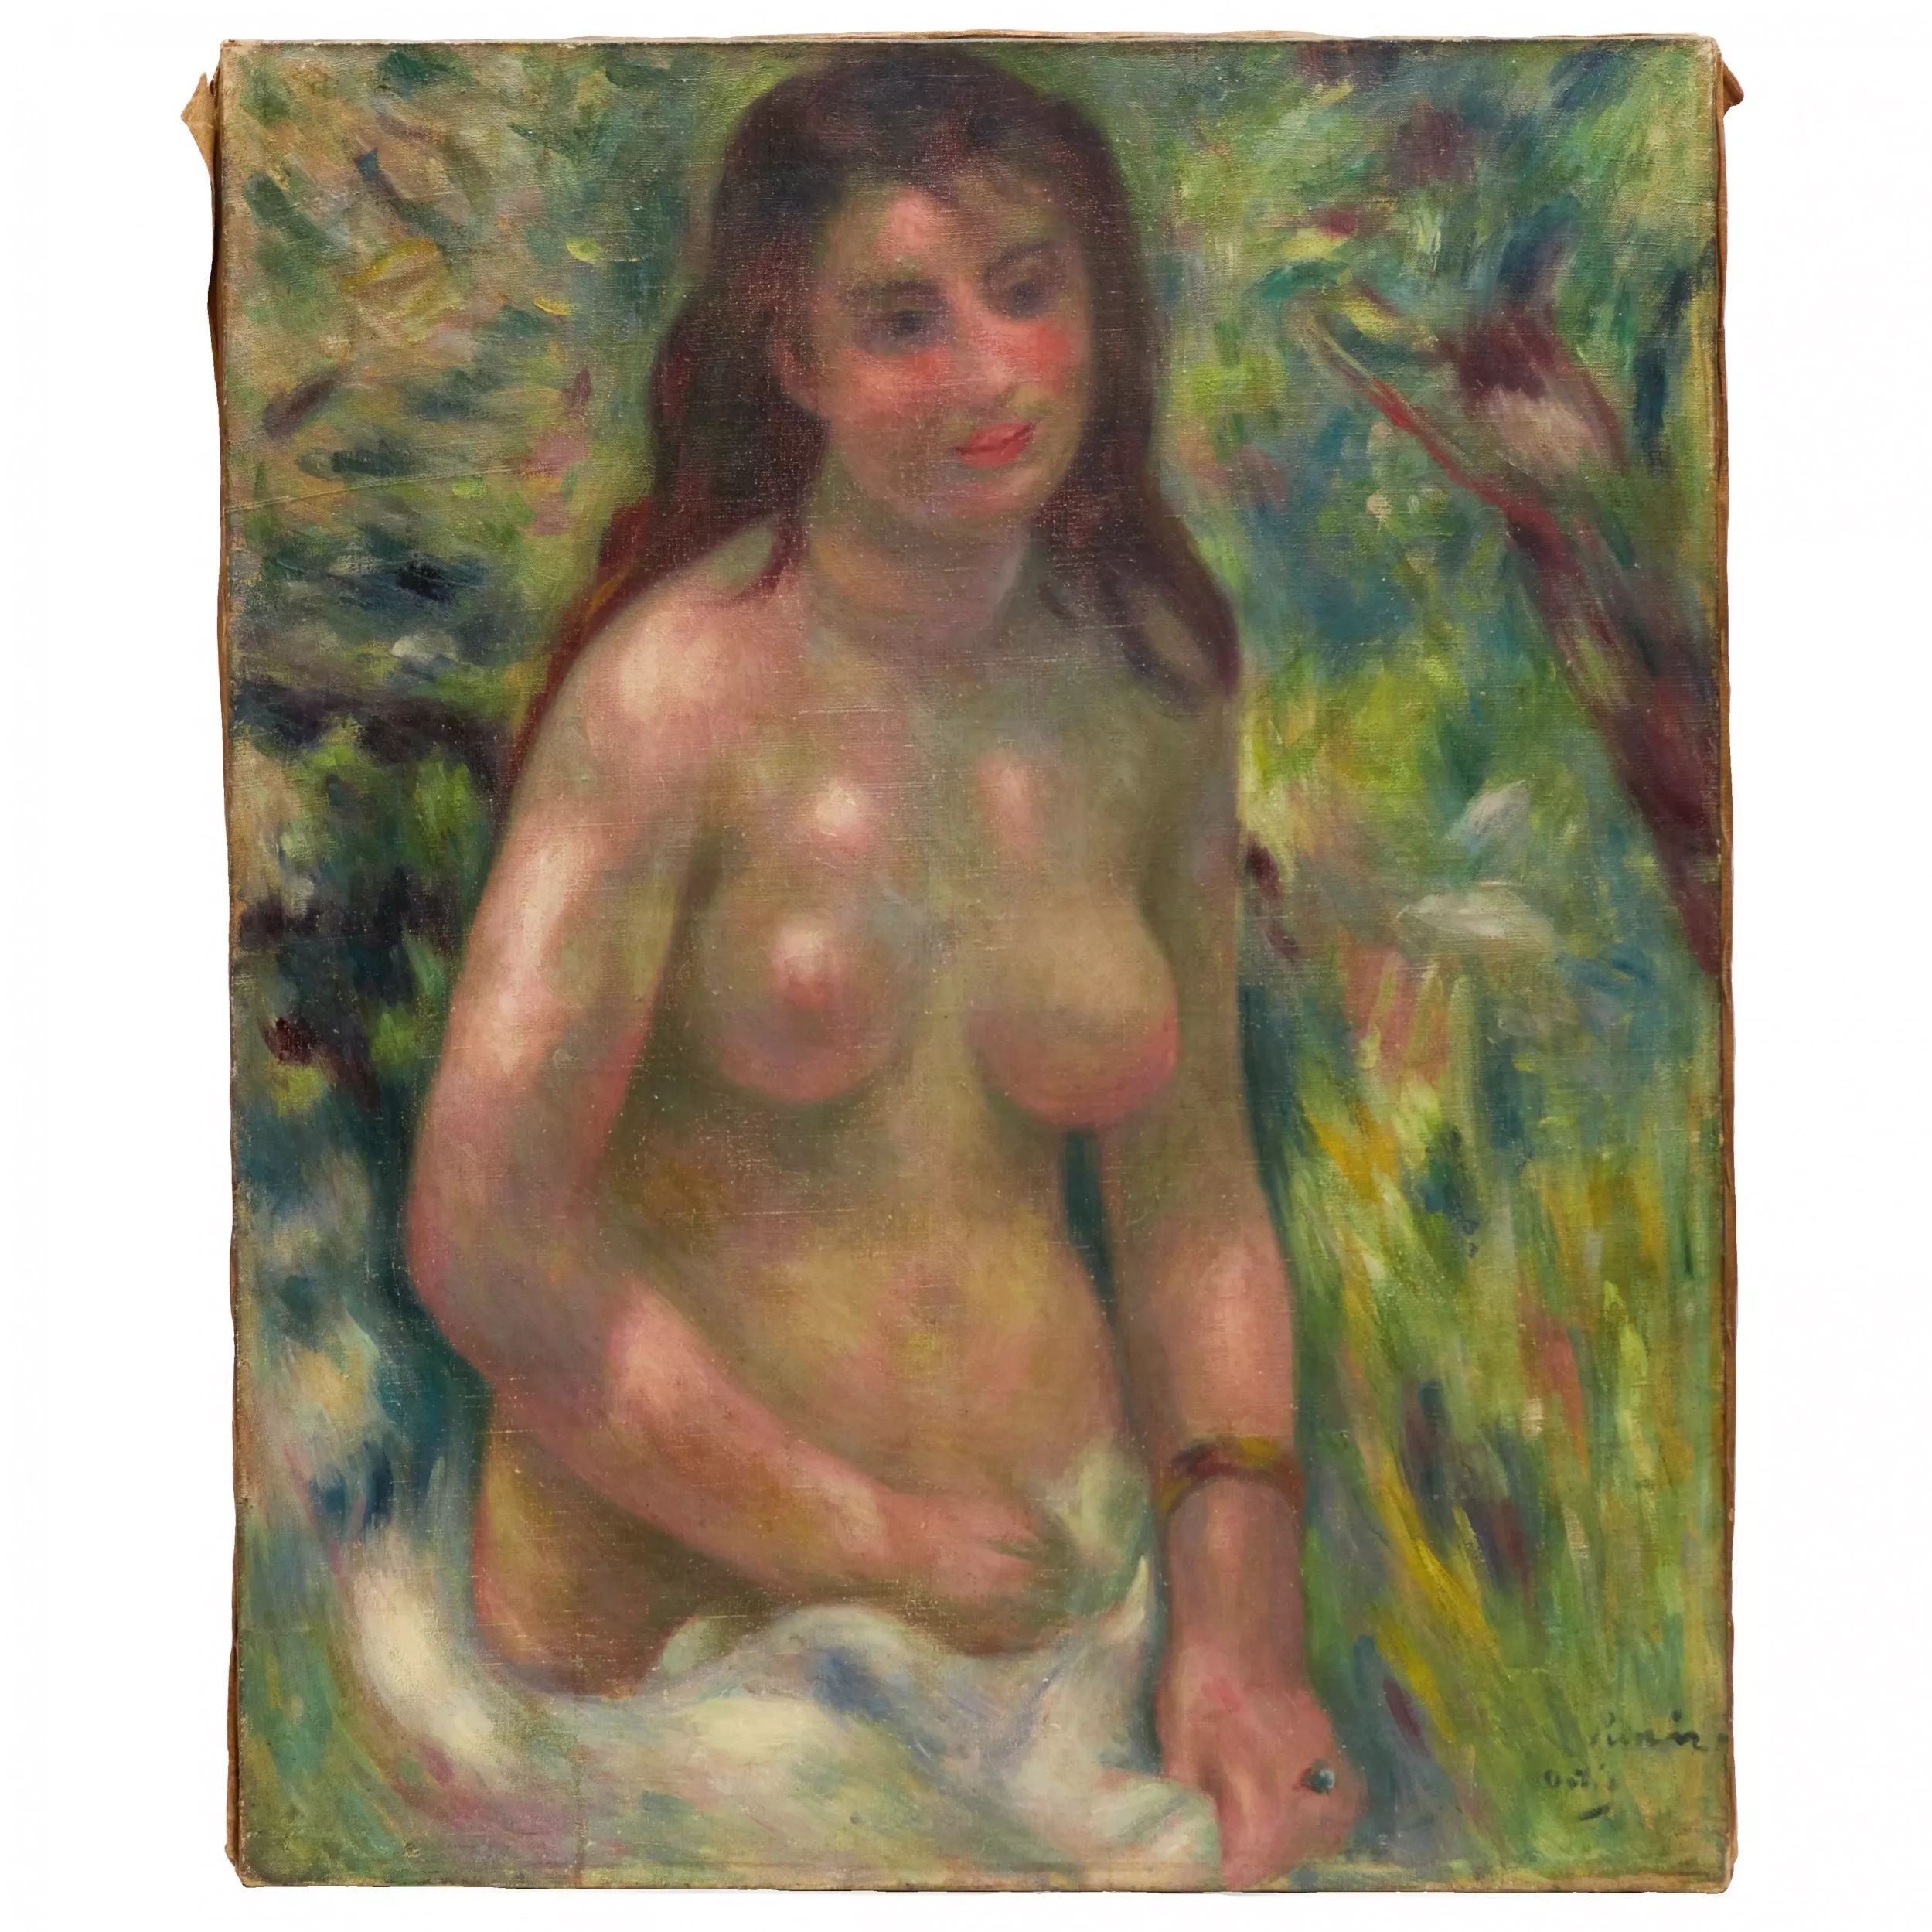 Bather in sunny shade, in the manner of Pierre-Auguste Renoir (1841-1919). - Image 3 of 6